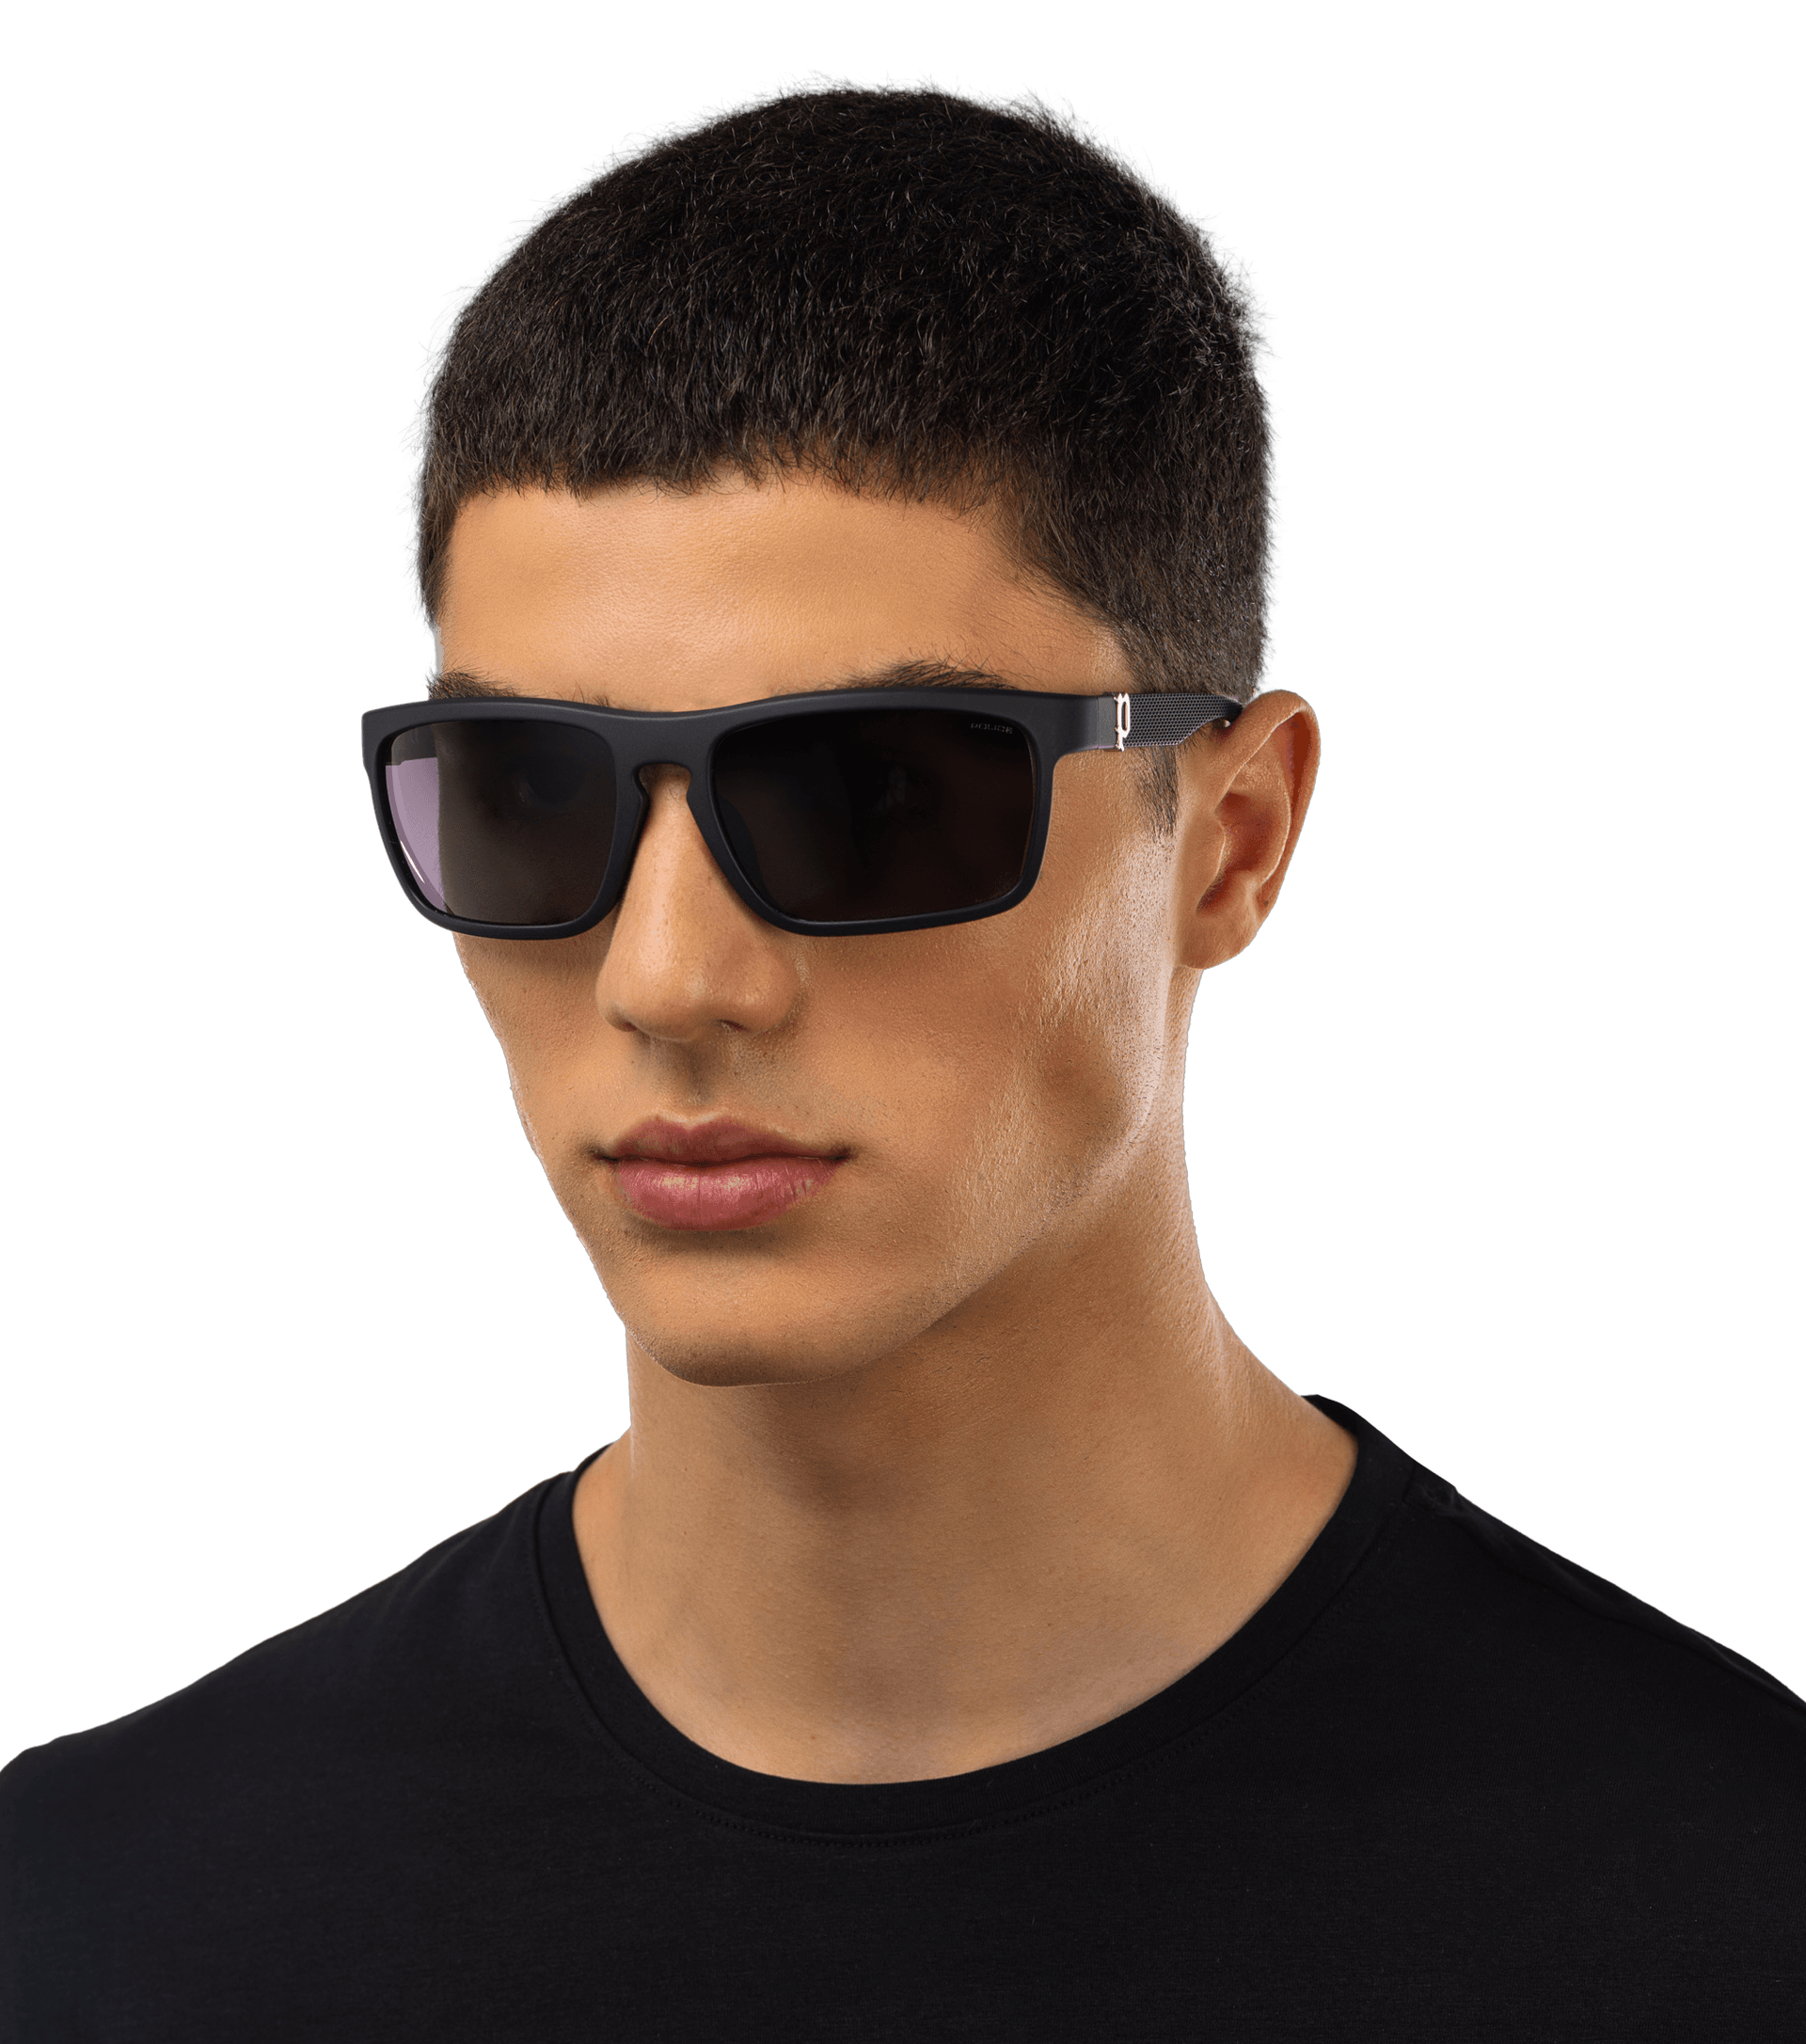 Police 2563 Black Oval Sunglasses Frames Only - Accessories